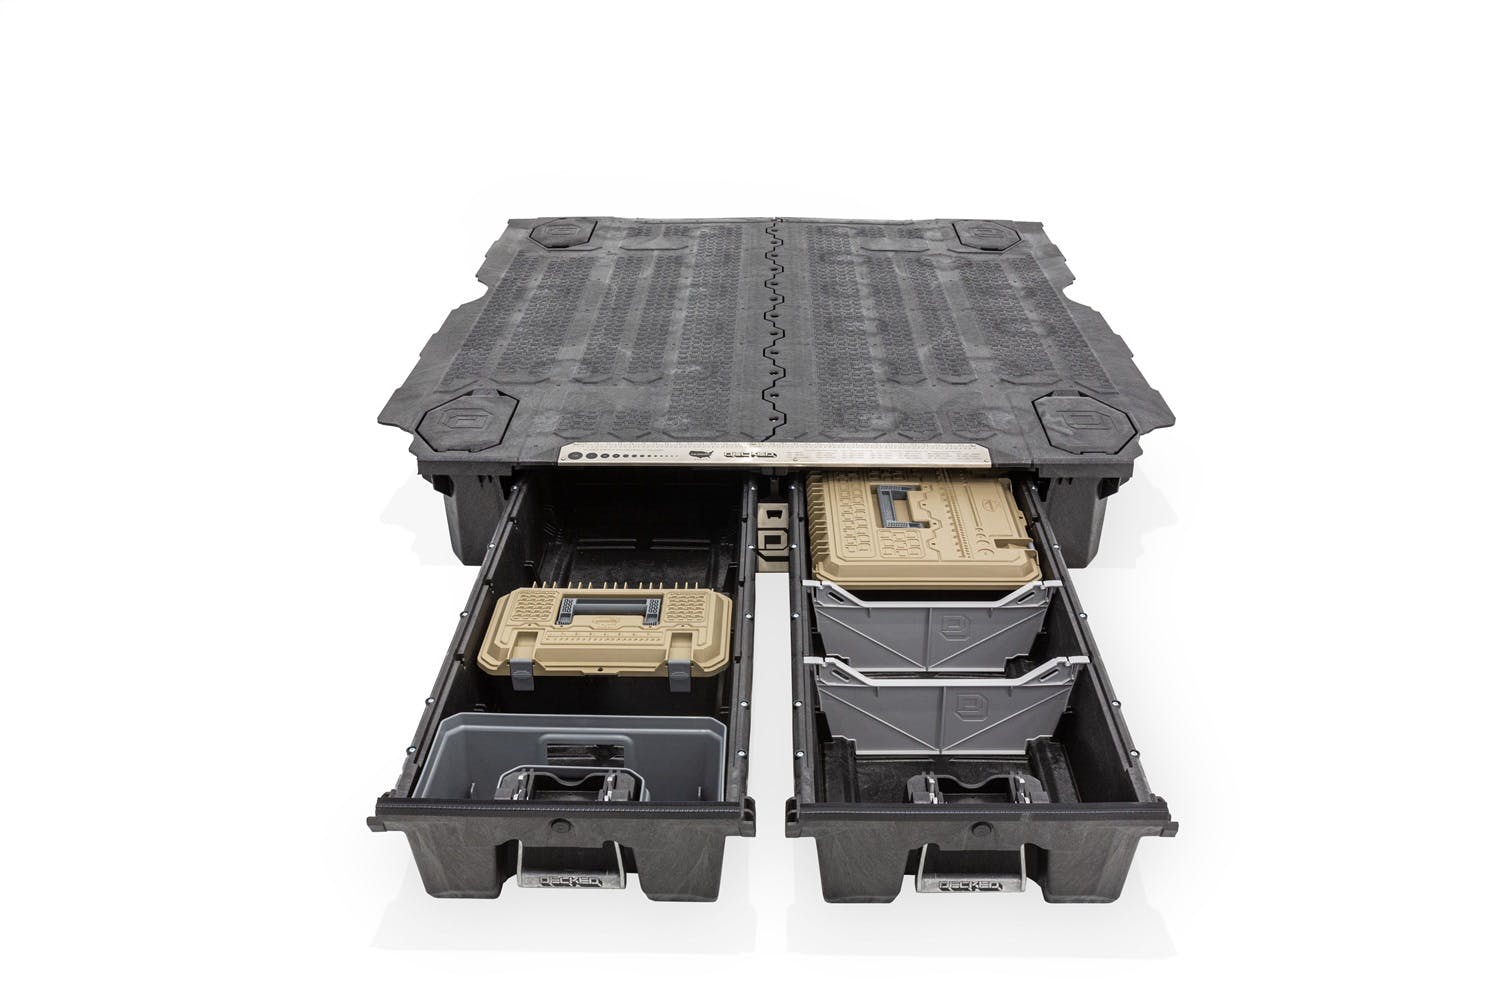 DECKED DF3 75.25 Two Drawer Storage System for A Full Size Pick Up Truck